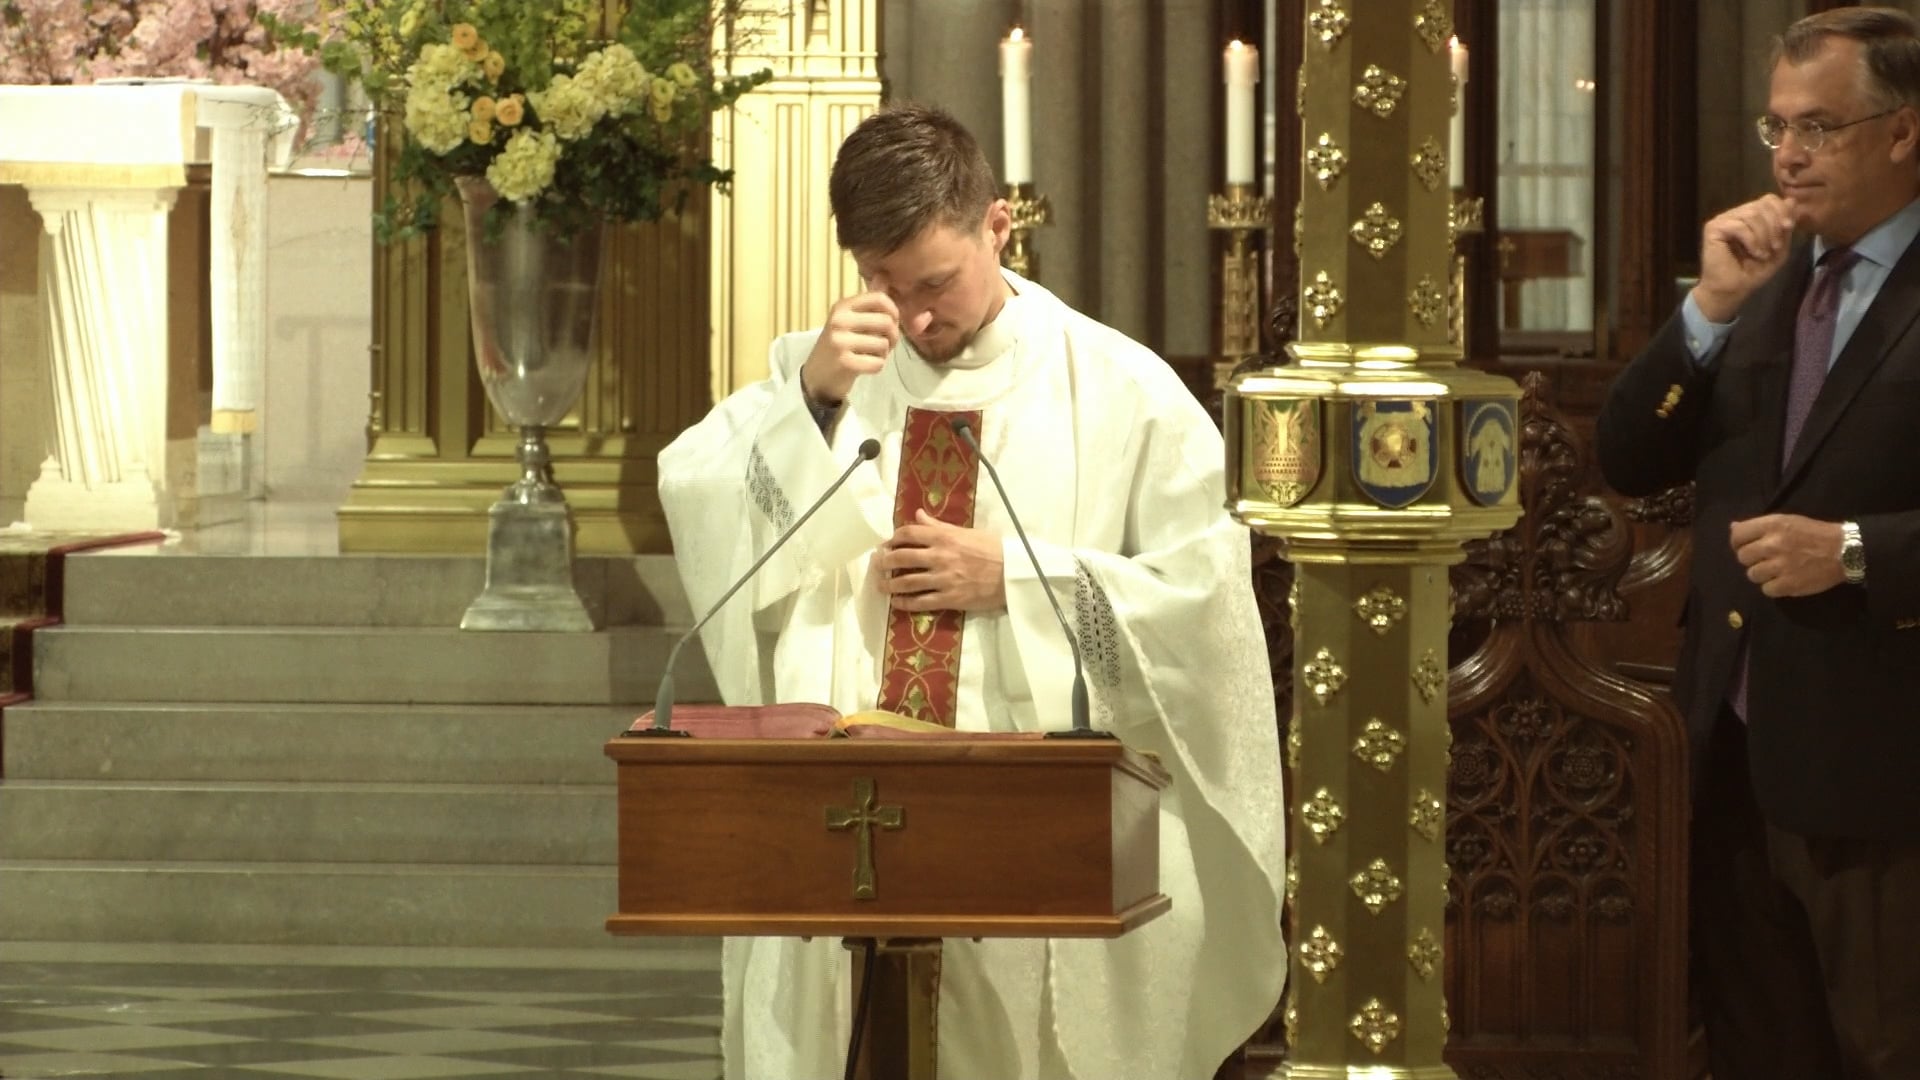 Mass from St. Patrick's Cathedral - May 25, 2022